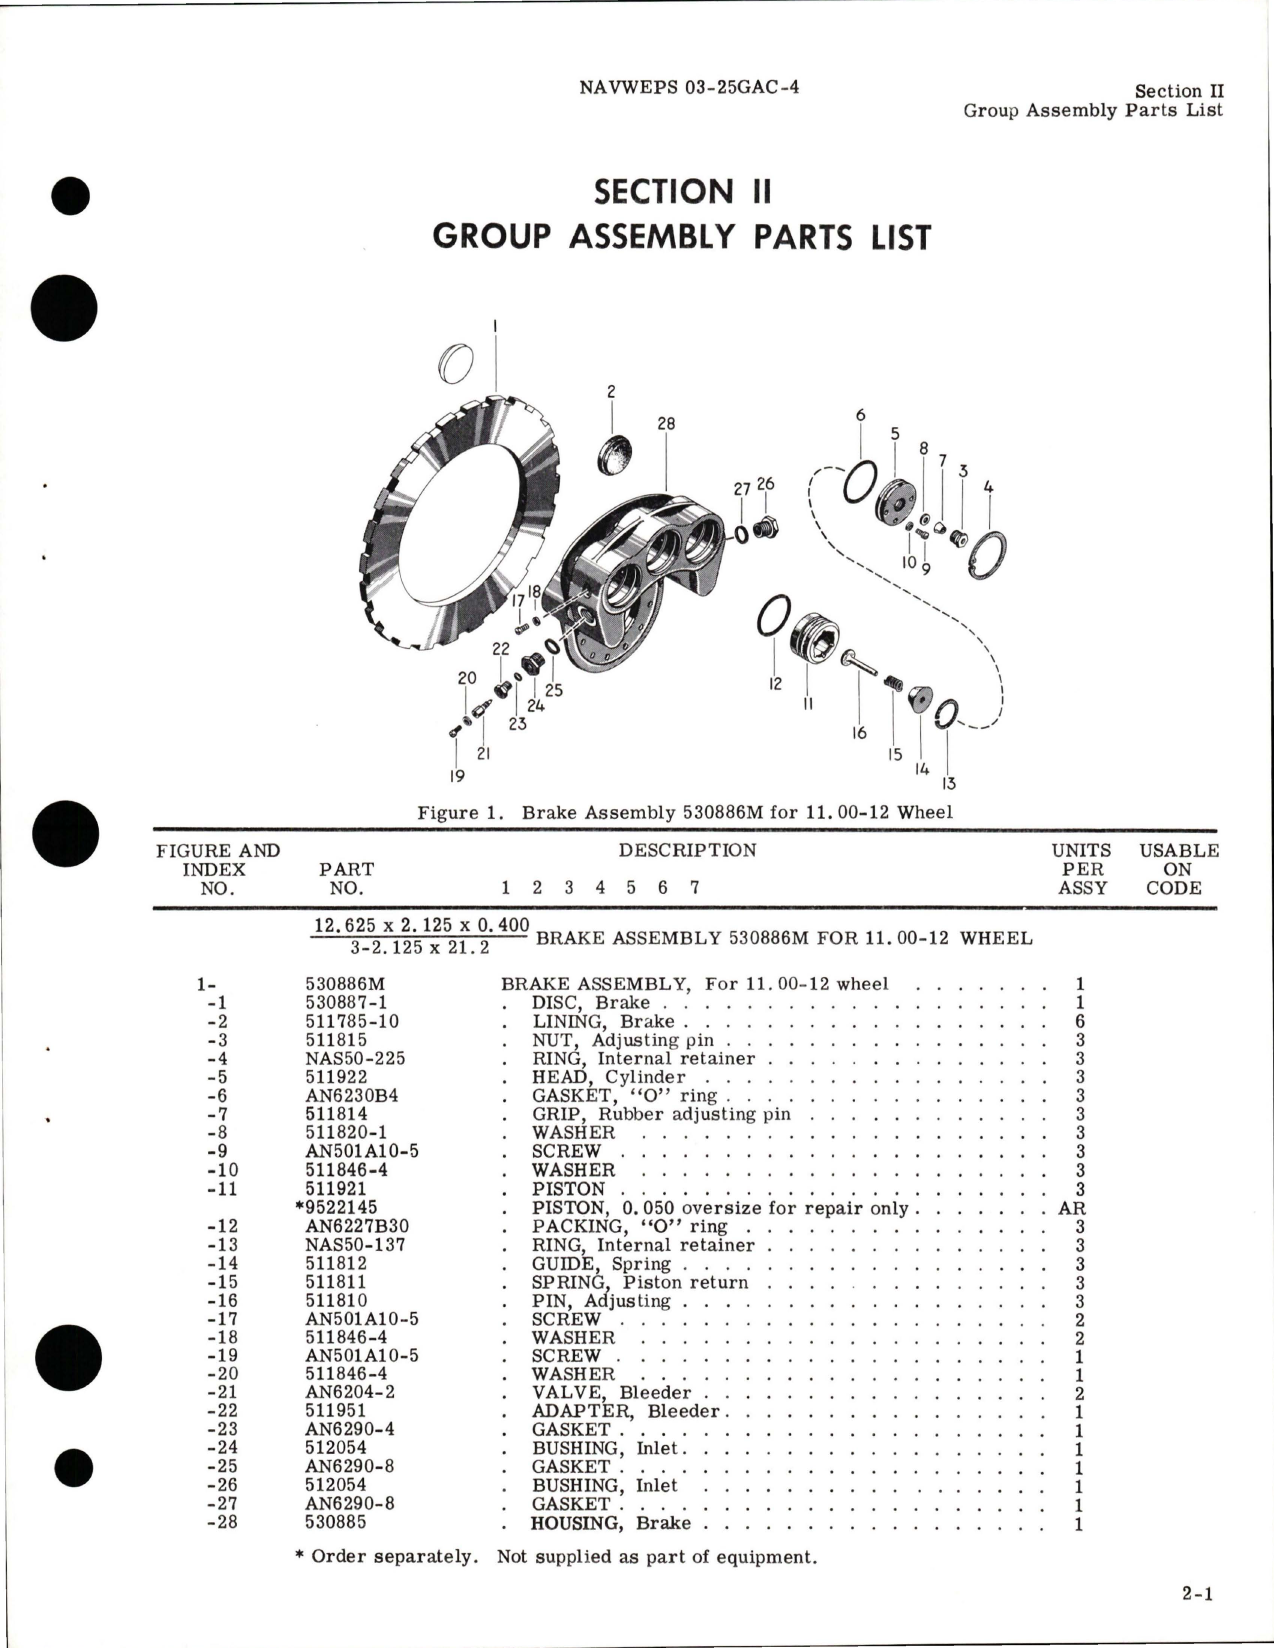 Sample page 9 from AirCorps Library document: Illustrated Parts Breakdown for Disc Brakes